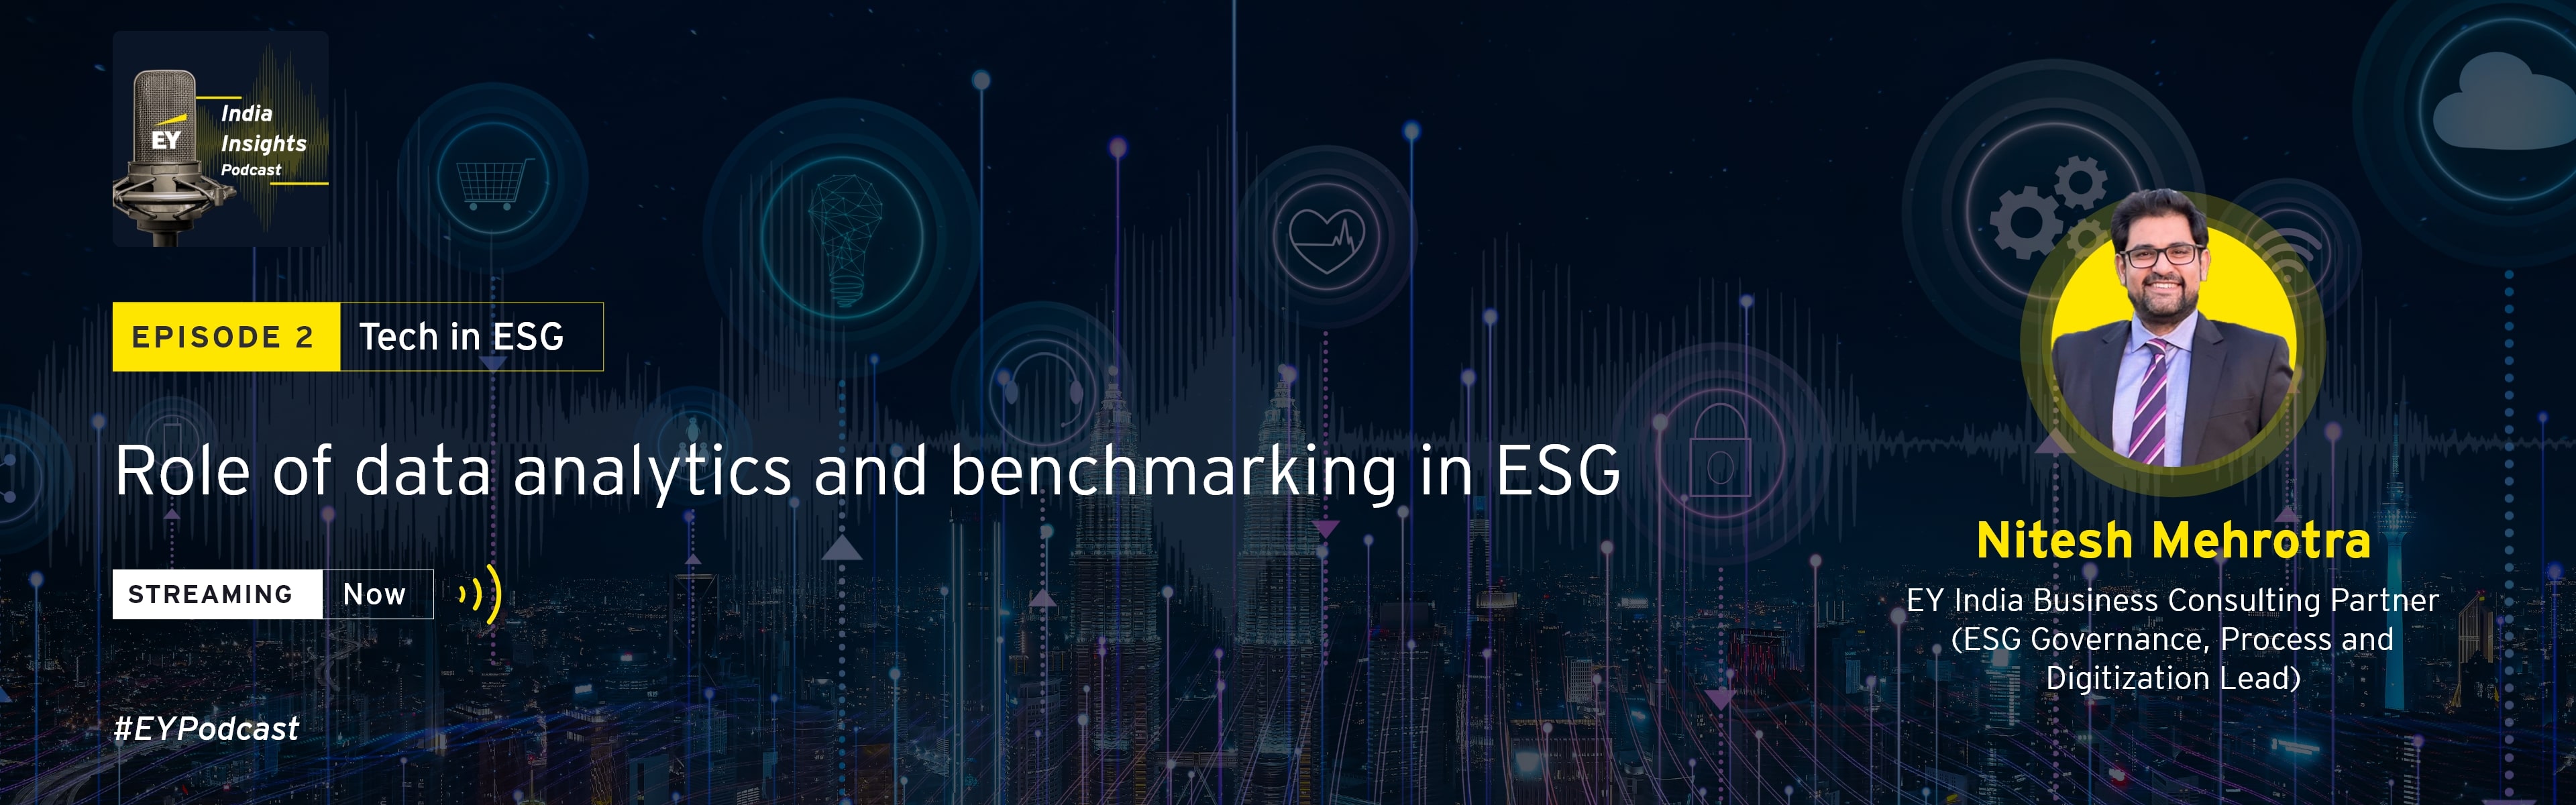 Tech in ESG: role of data analytics and benchmarking in ESG